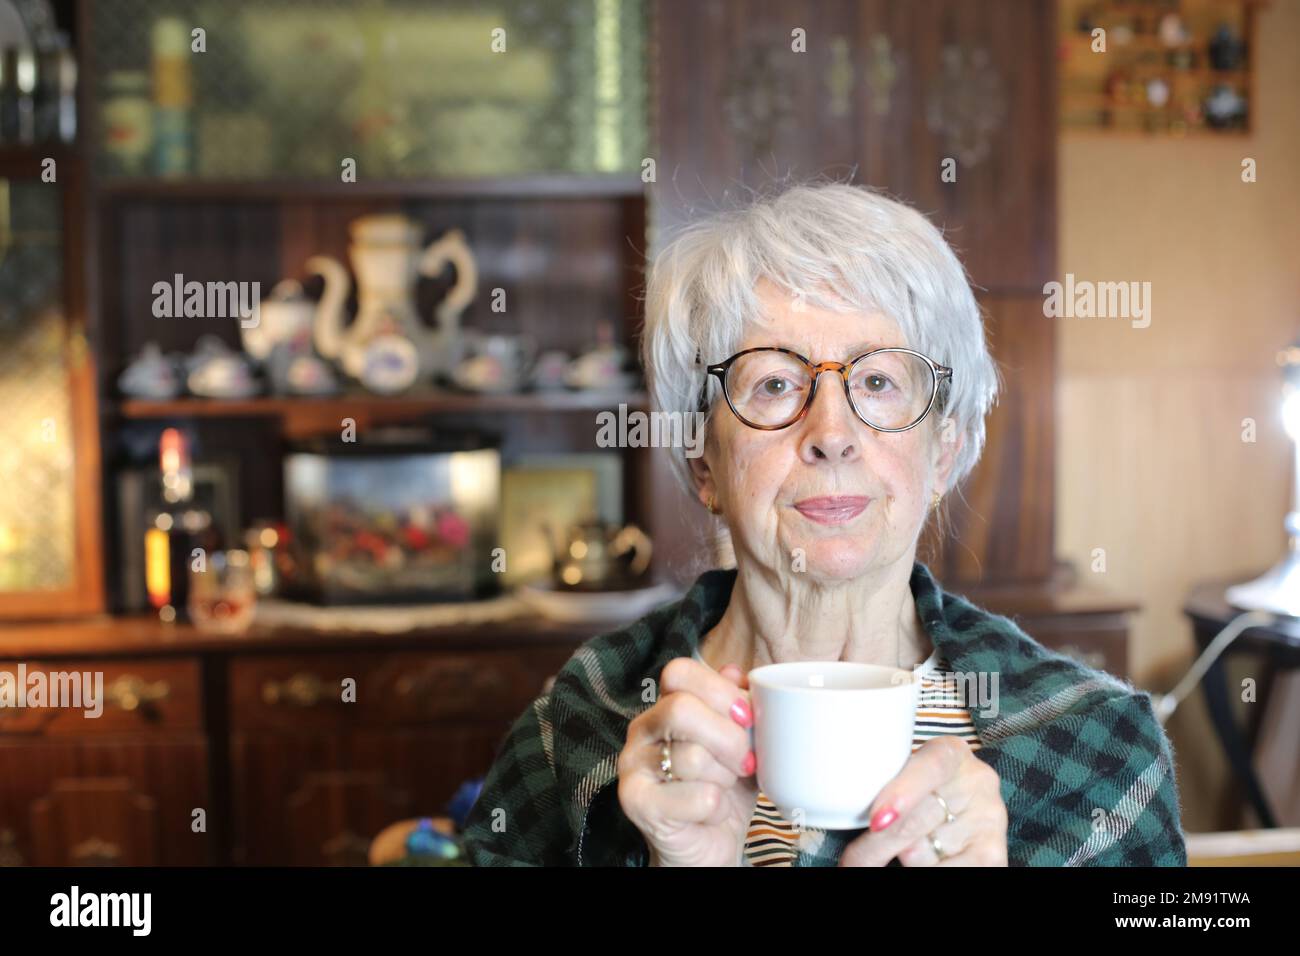 Senior woman covered in a blanket holding warm drink Stock Photo